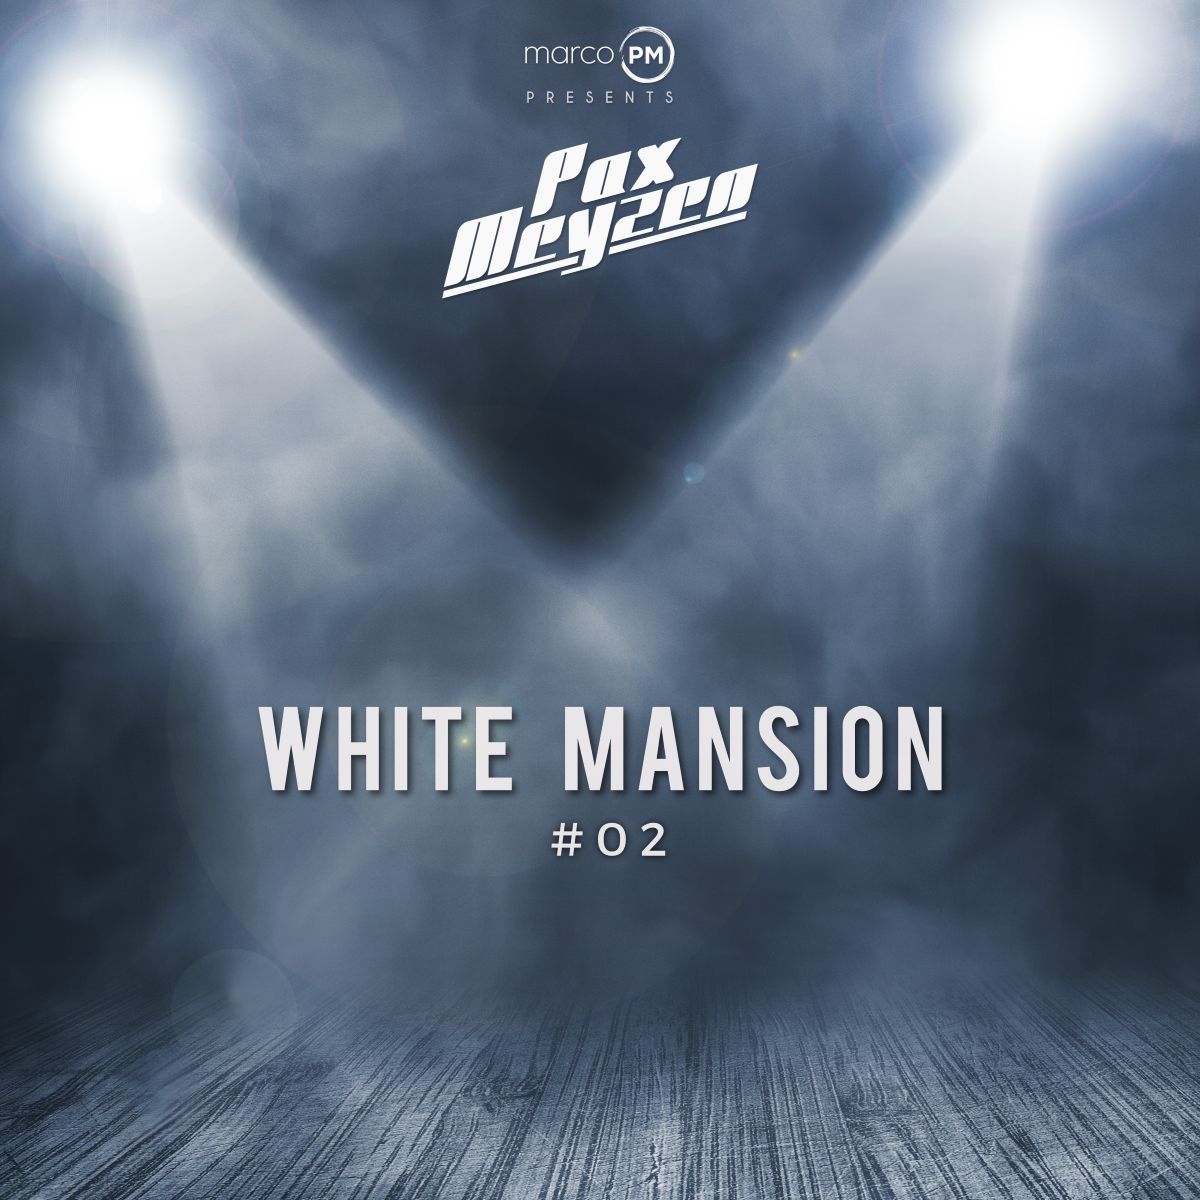 White Mansion #02 - Marco PM pres. Pax Meyzen [Mainstage & Big Room Techno/House/Trance Mix 2022]